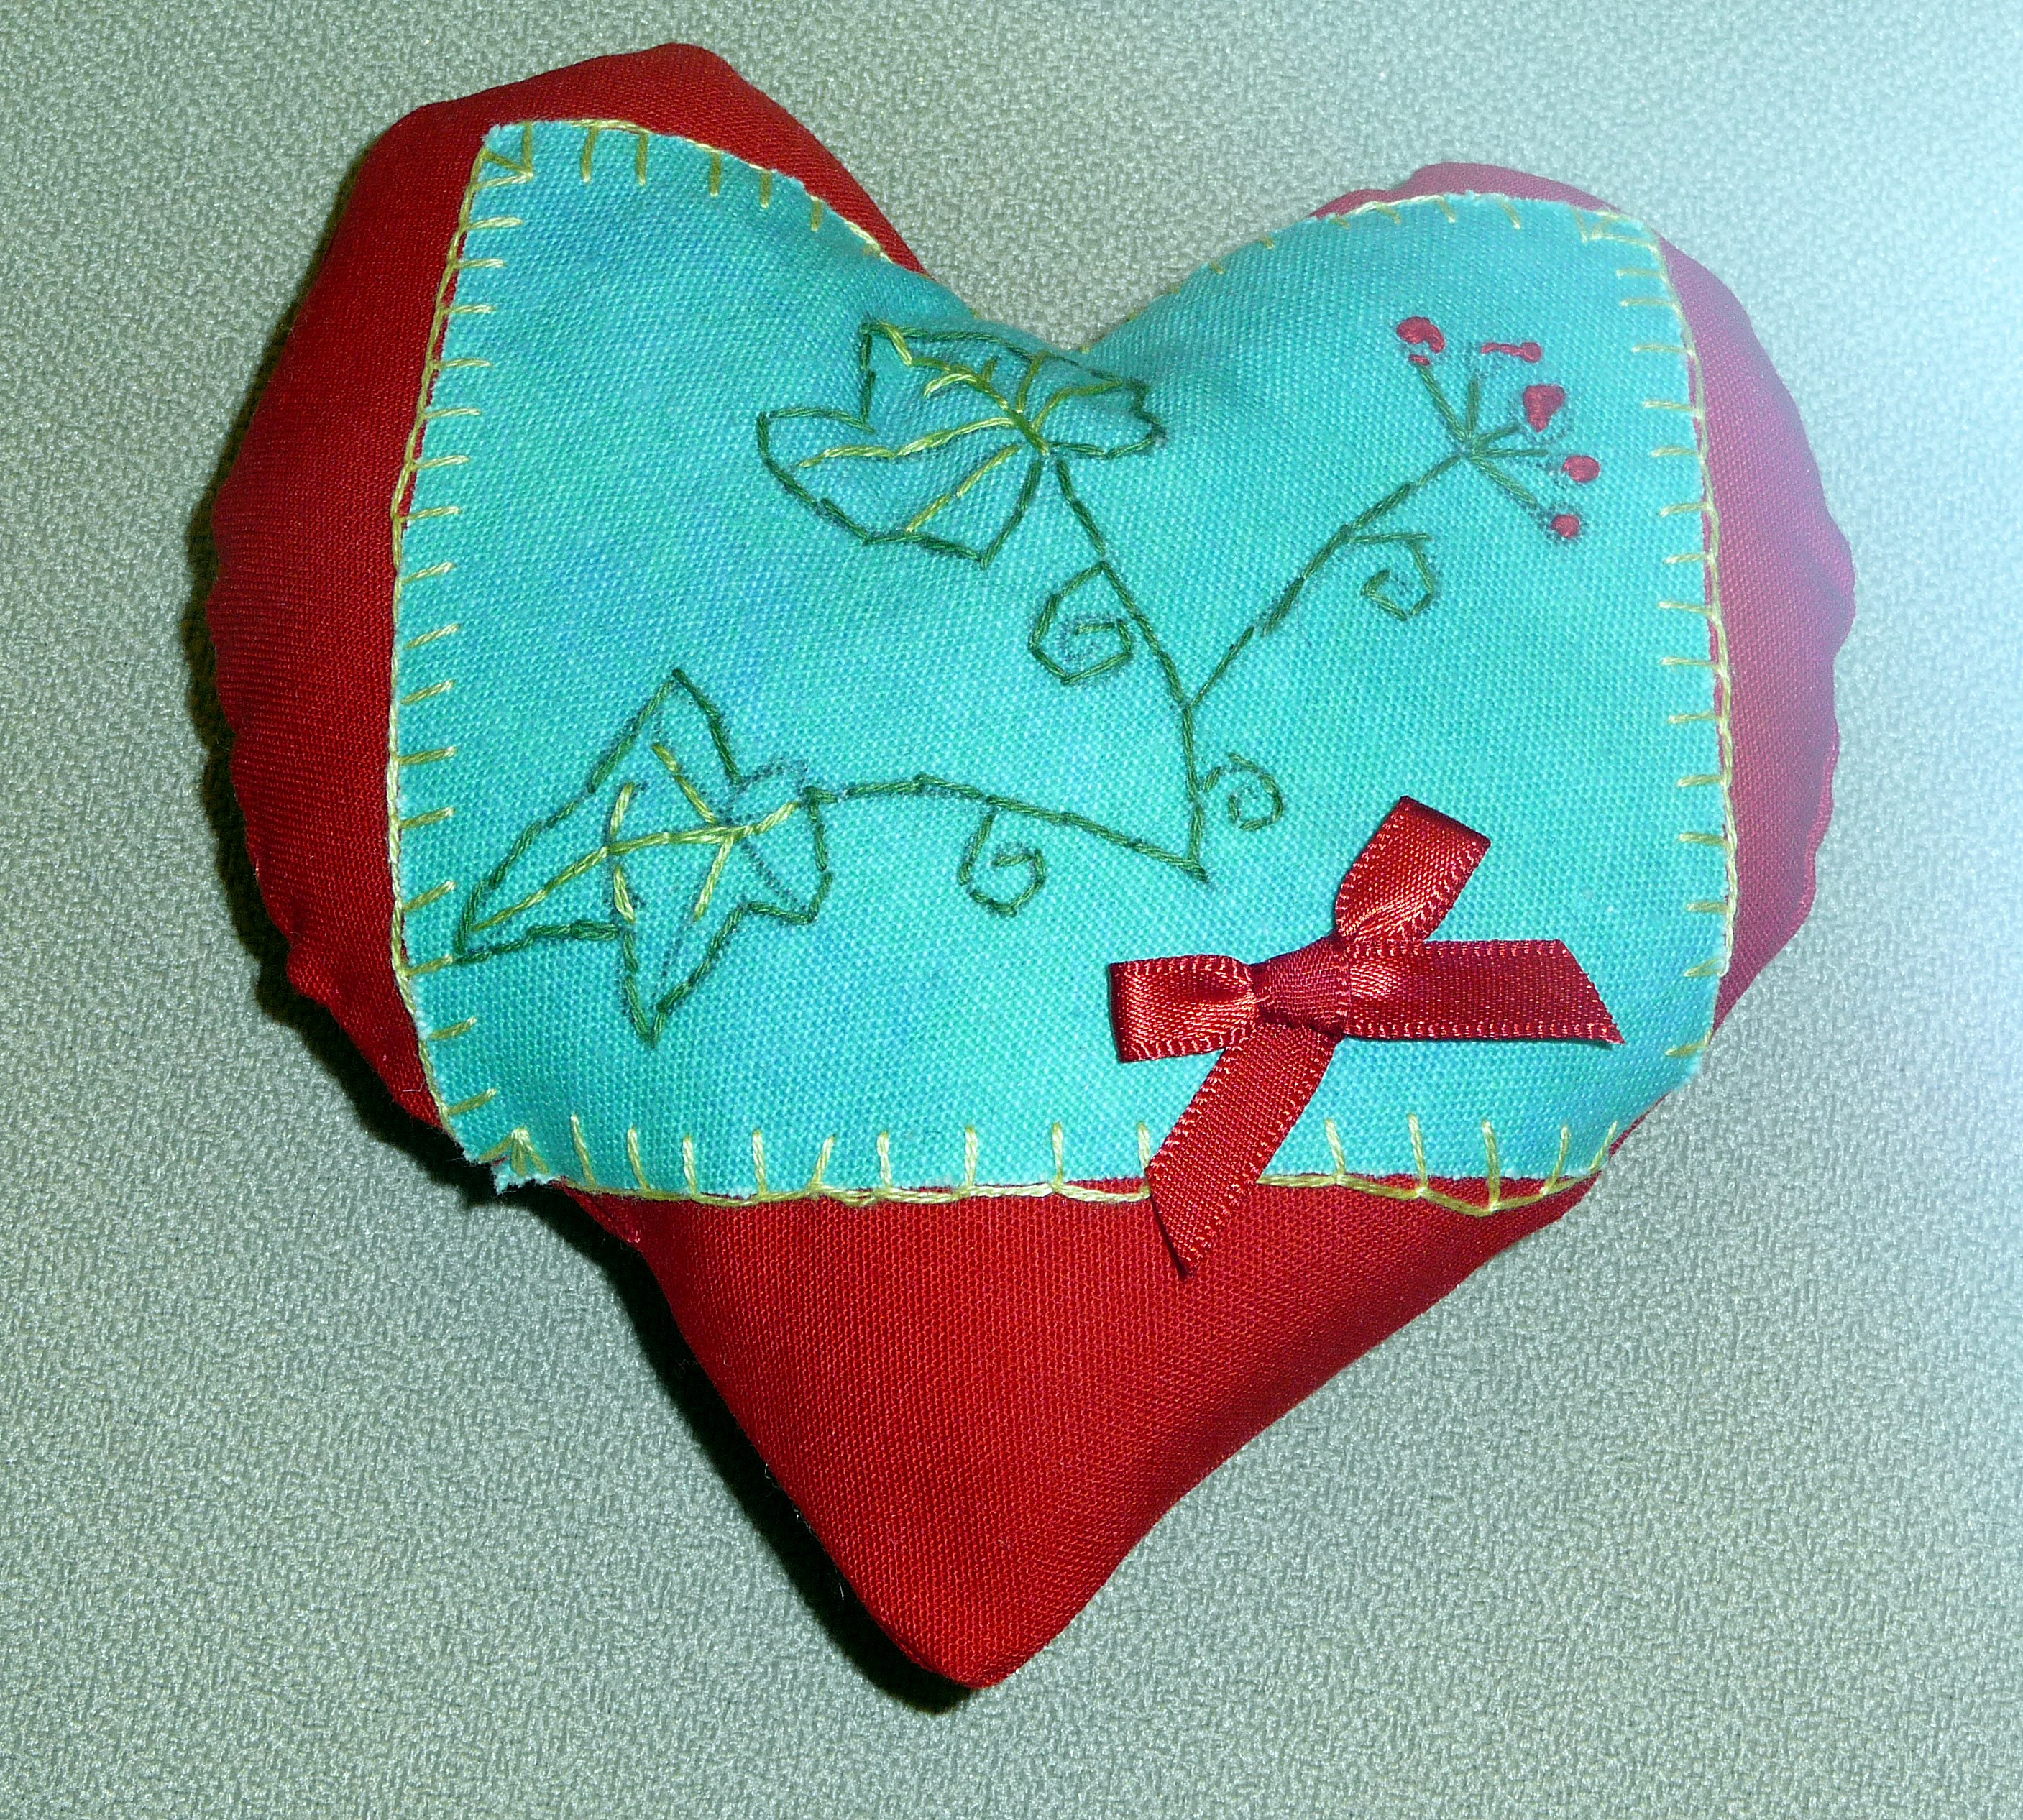 pincushion to commemorate World War 1  made by Zoe, a Merseyside Young Embroiderer